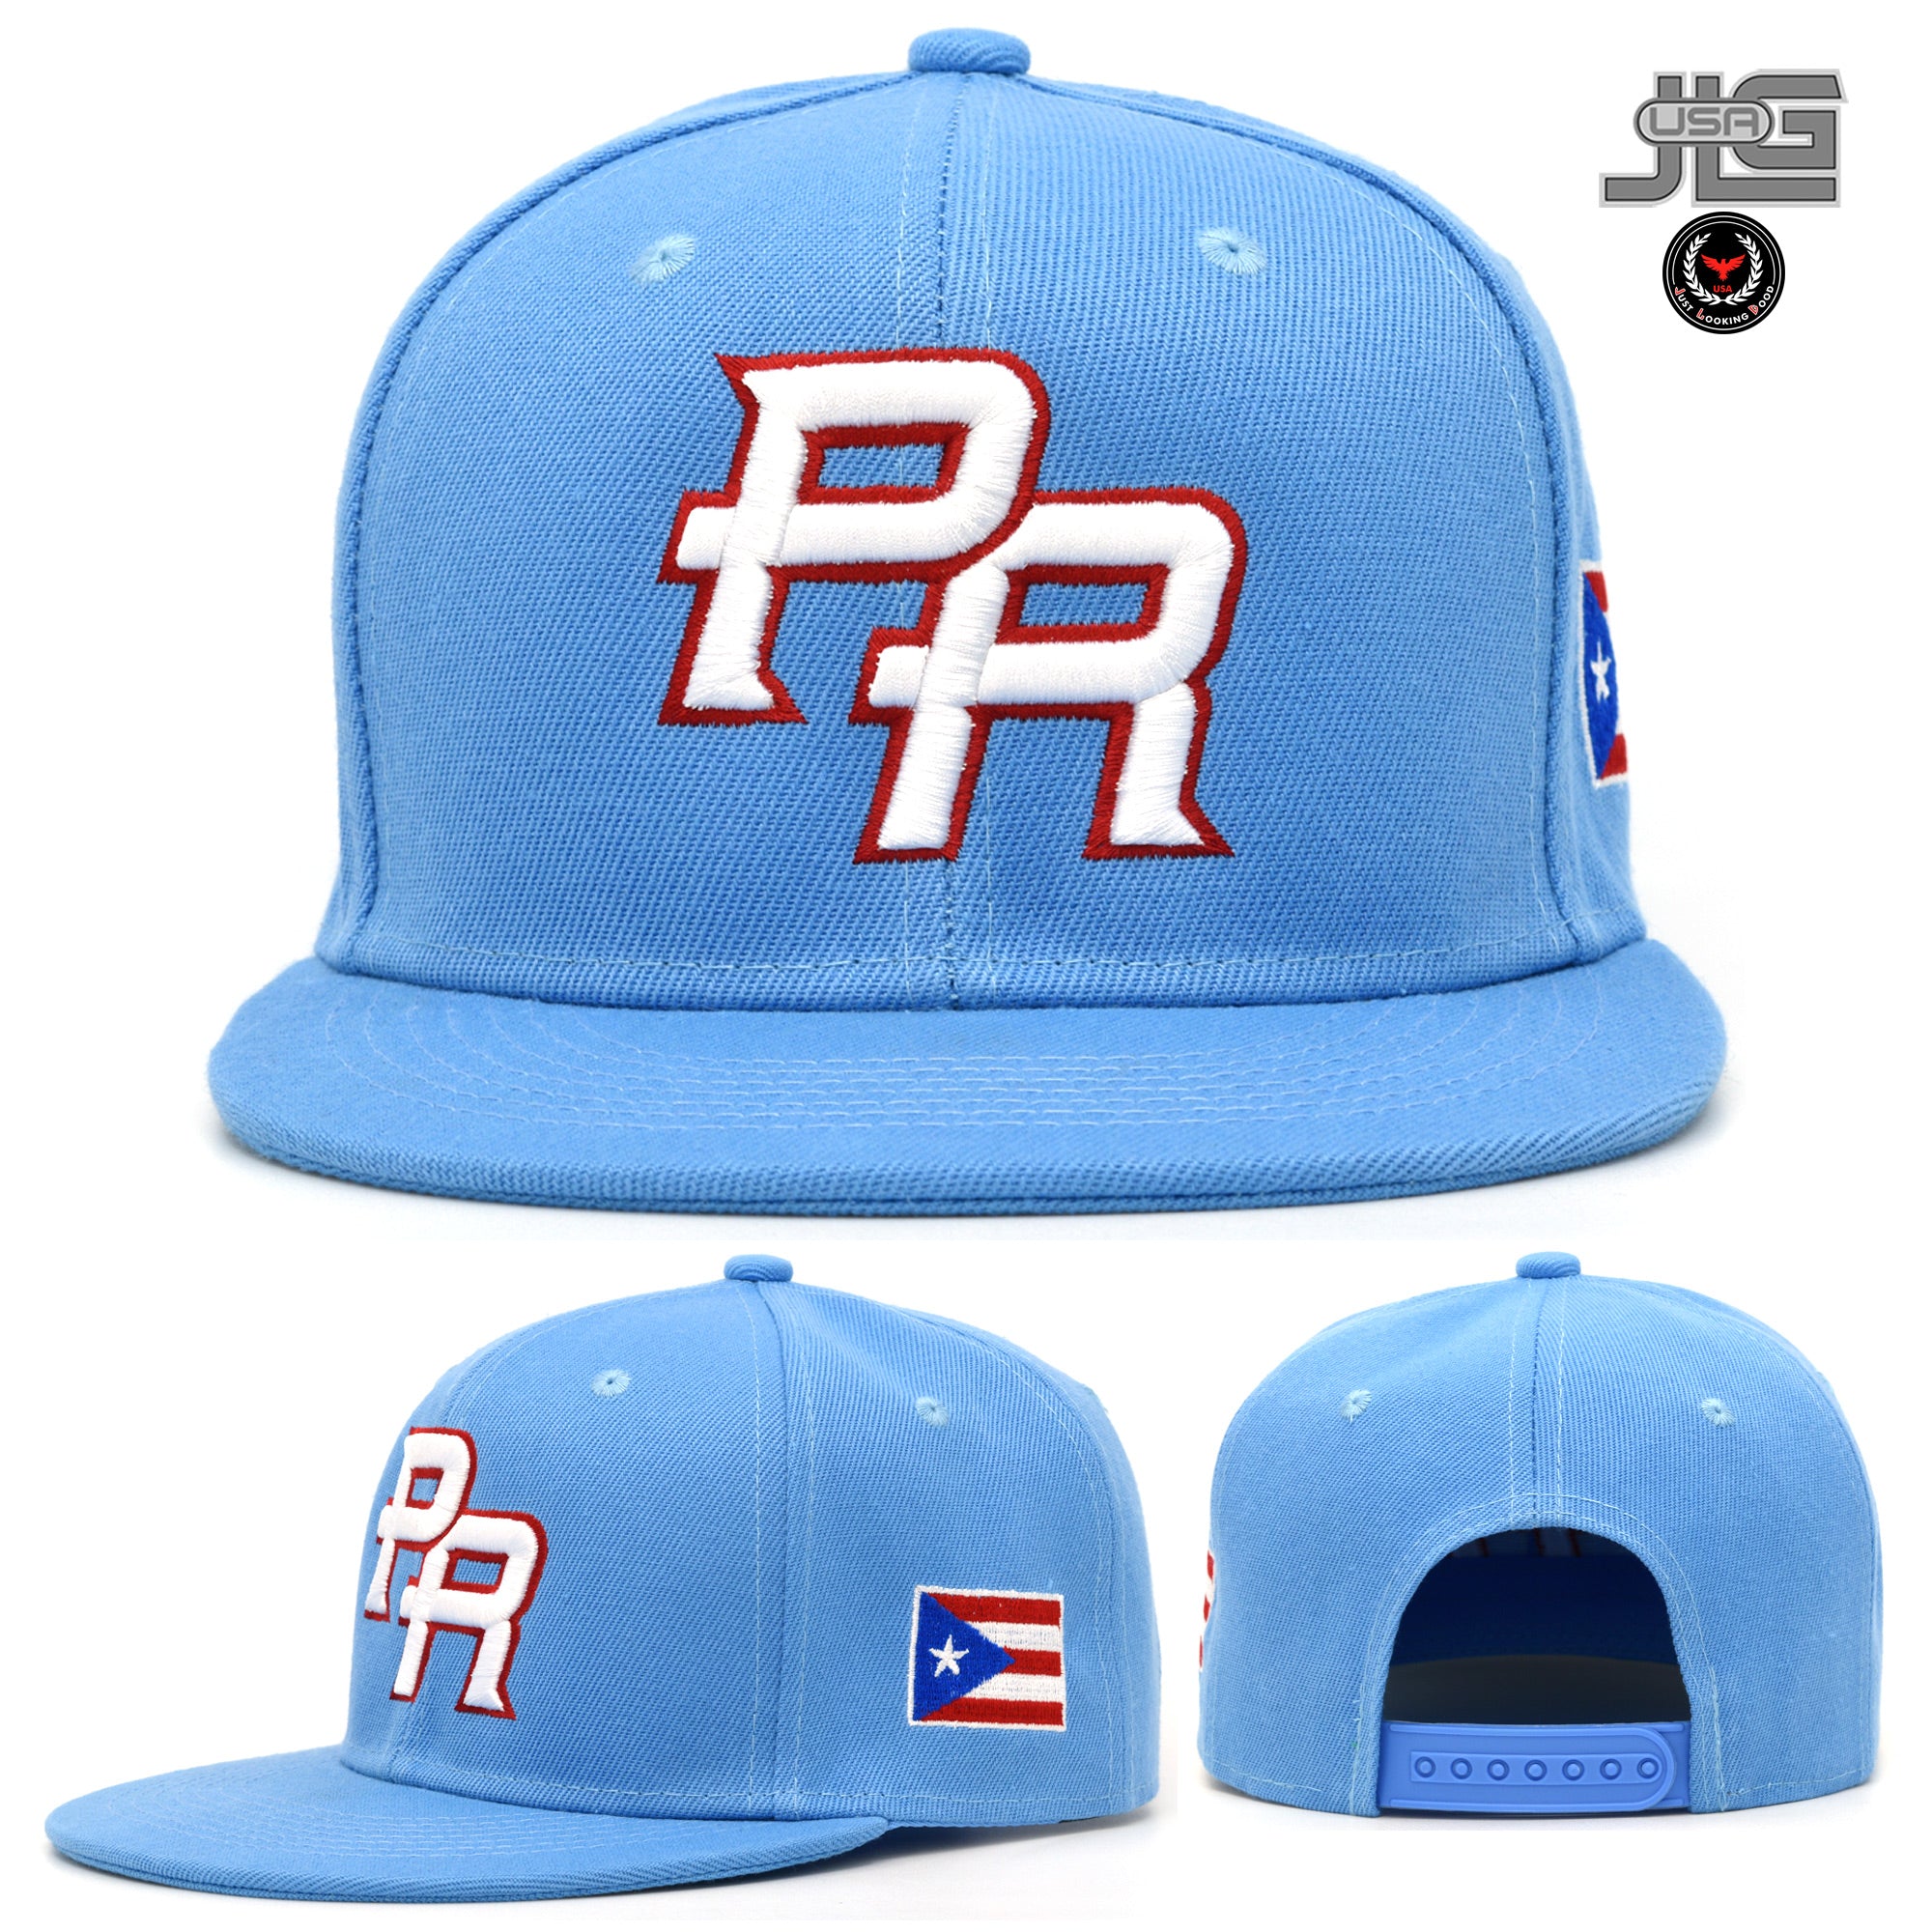 Puerto Rico Snap Back Caps with Embroidery PR Logo